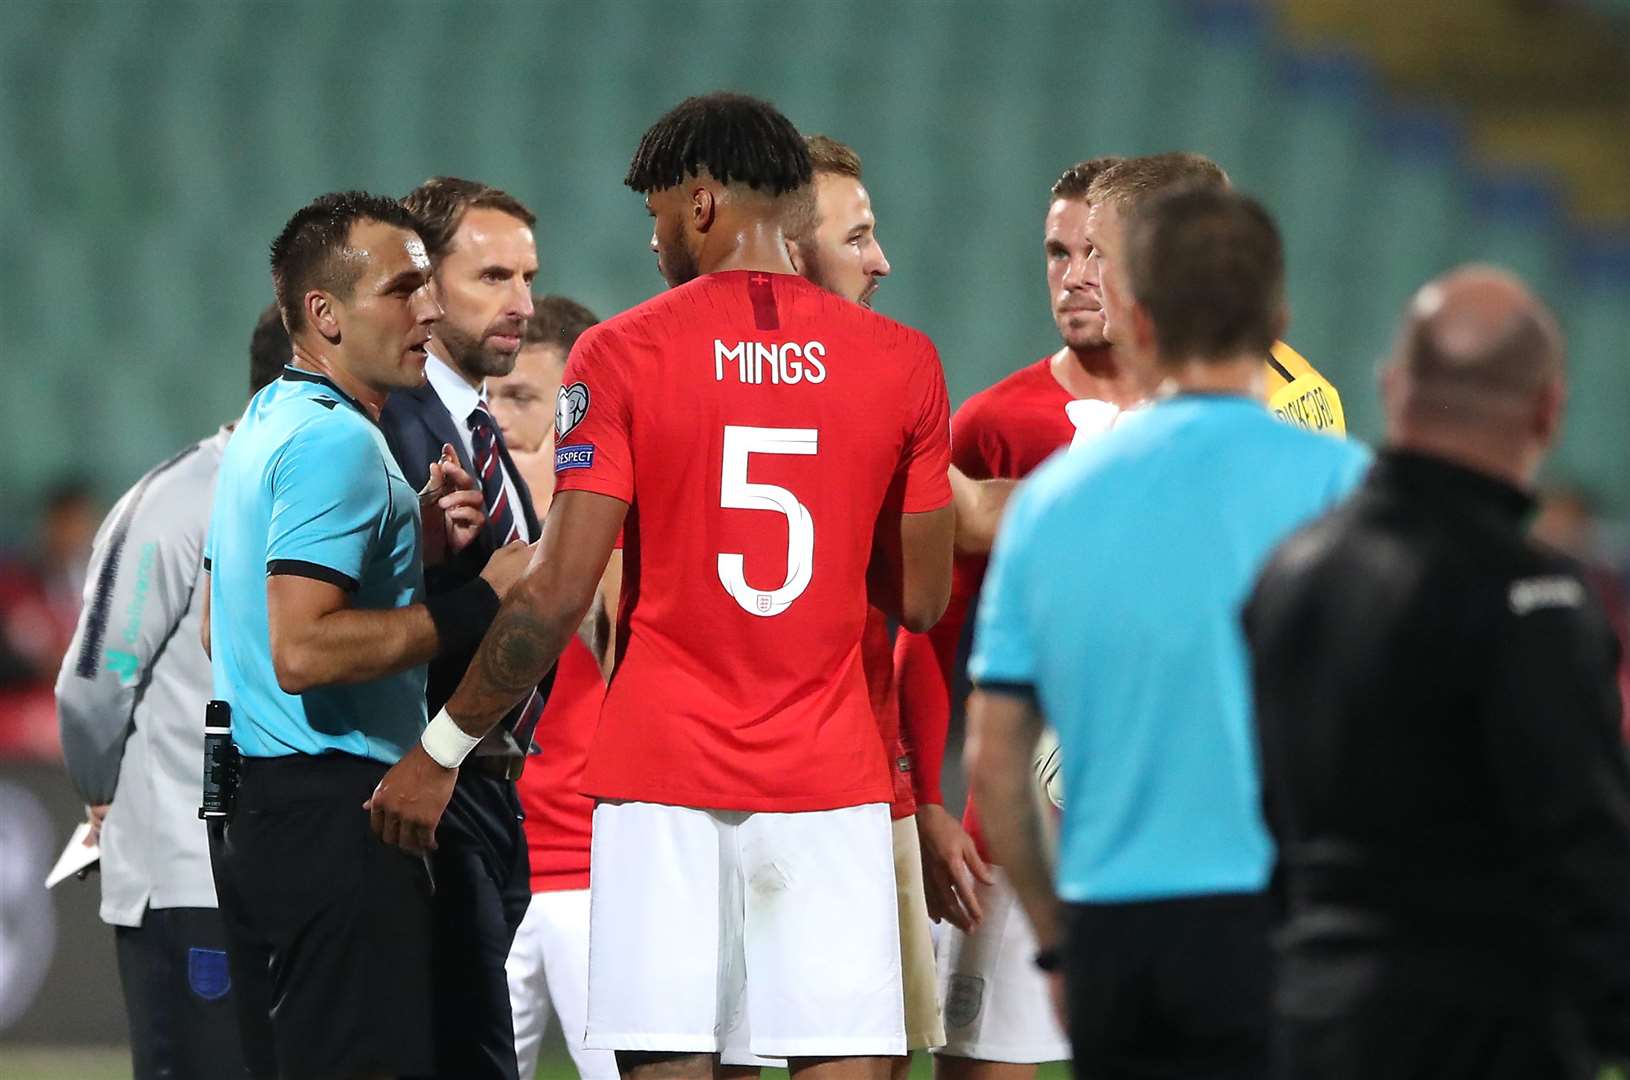 Match referee Ivan Bebek (left) speaks to England manager Gareth Southgate and Tyrone Mings over racist chants from fans during the Euro 2020 qualifying match in Bulgaria (Nick Potts/PA)